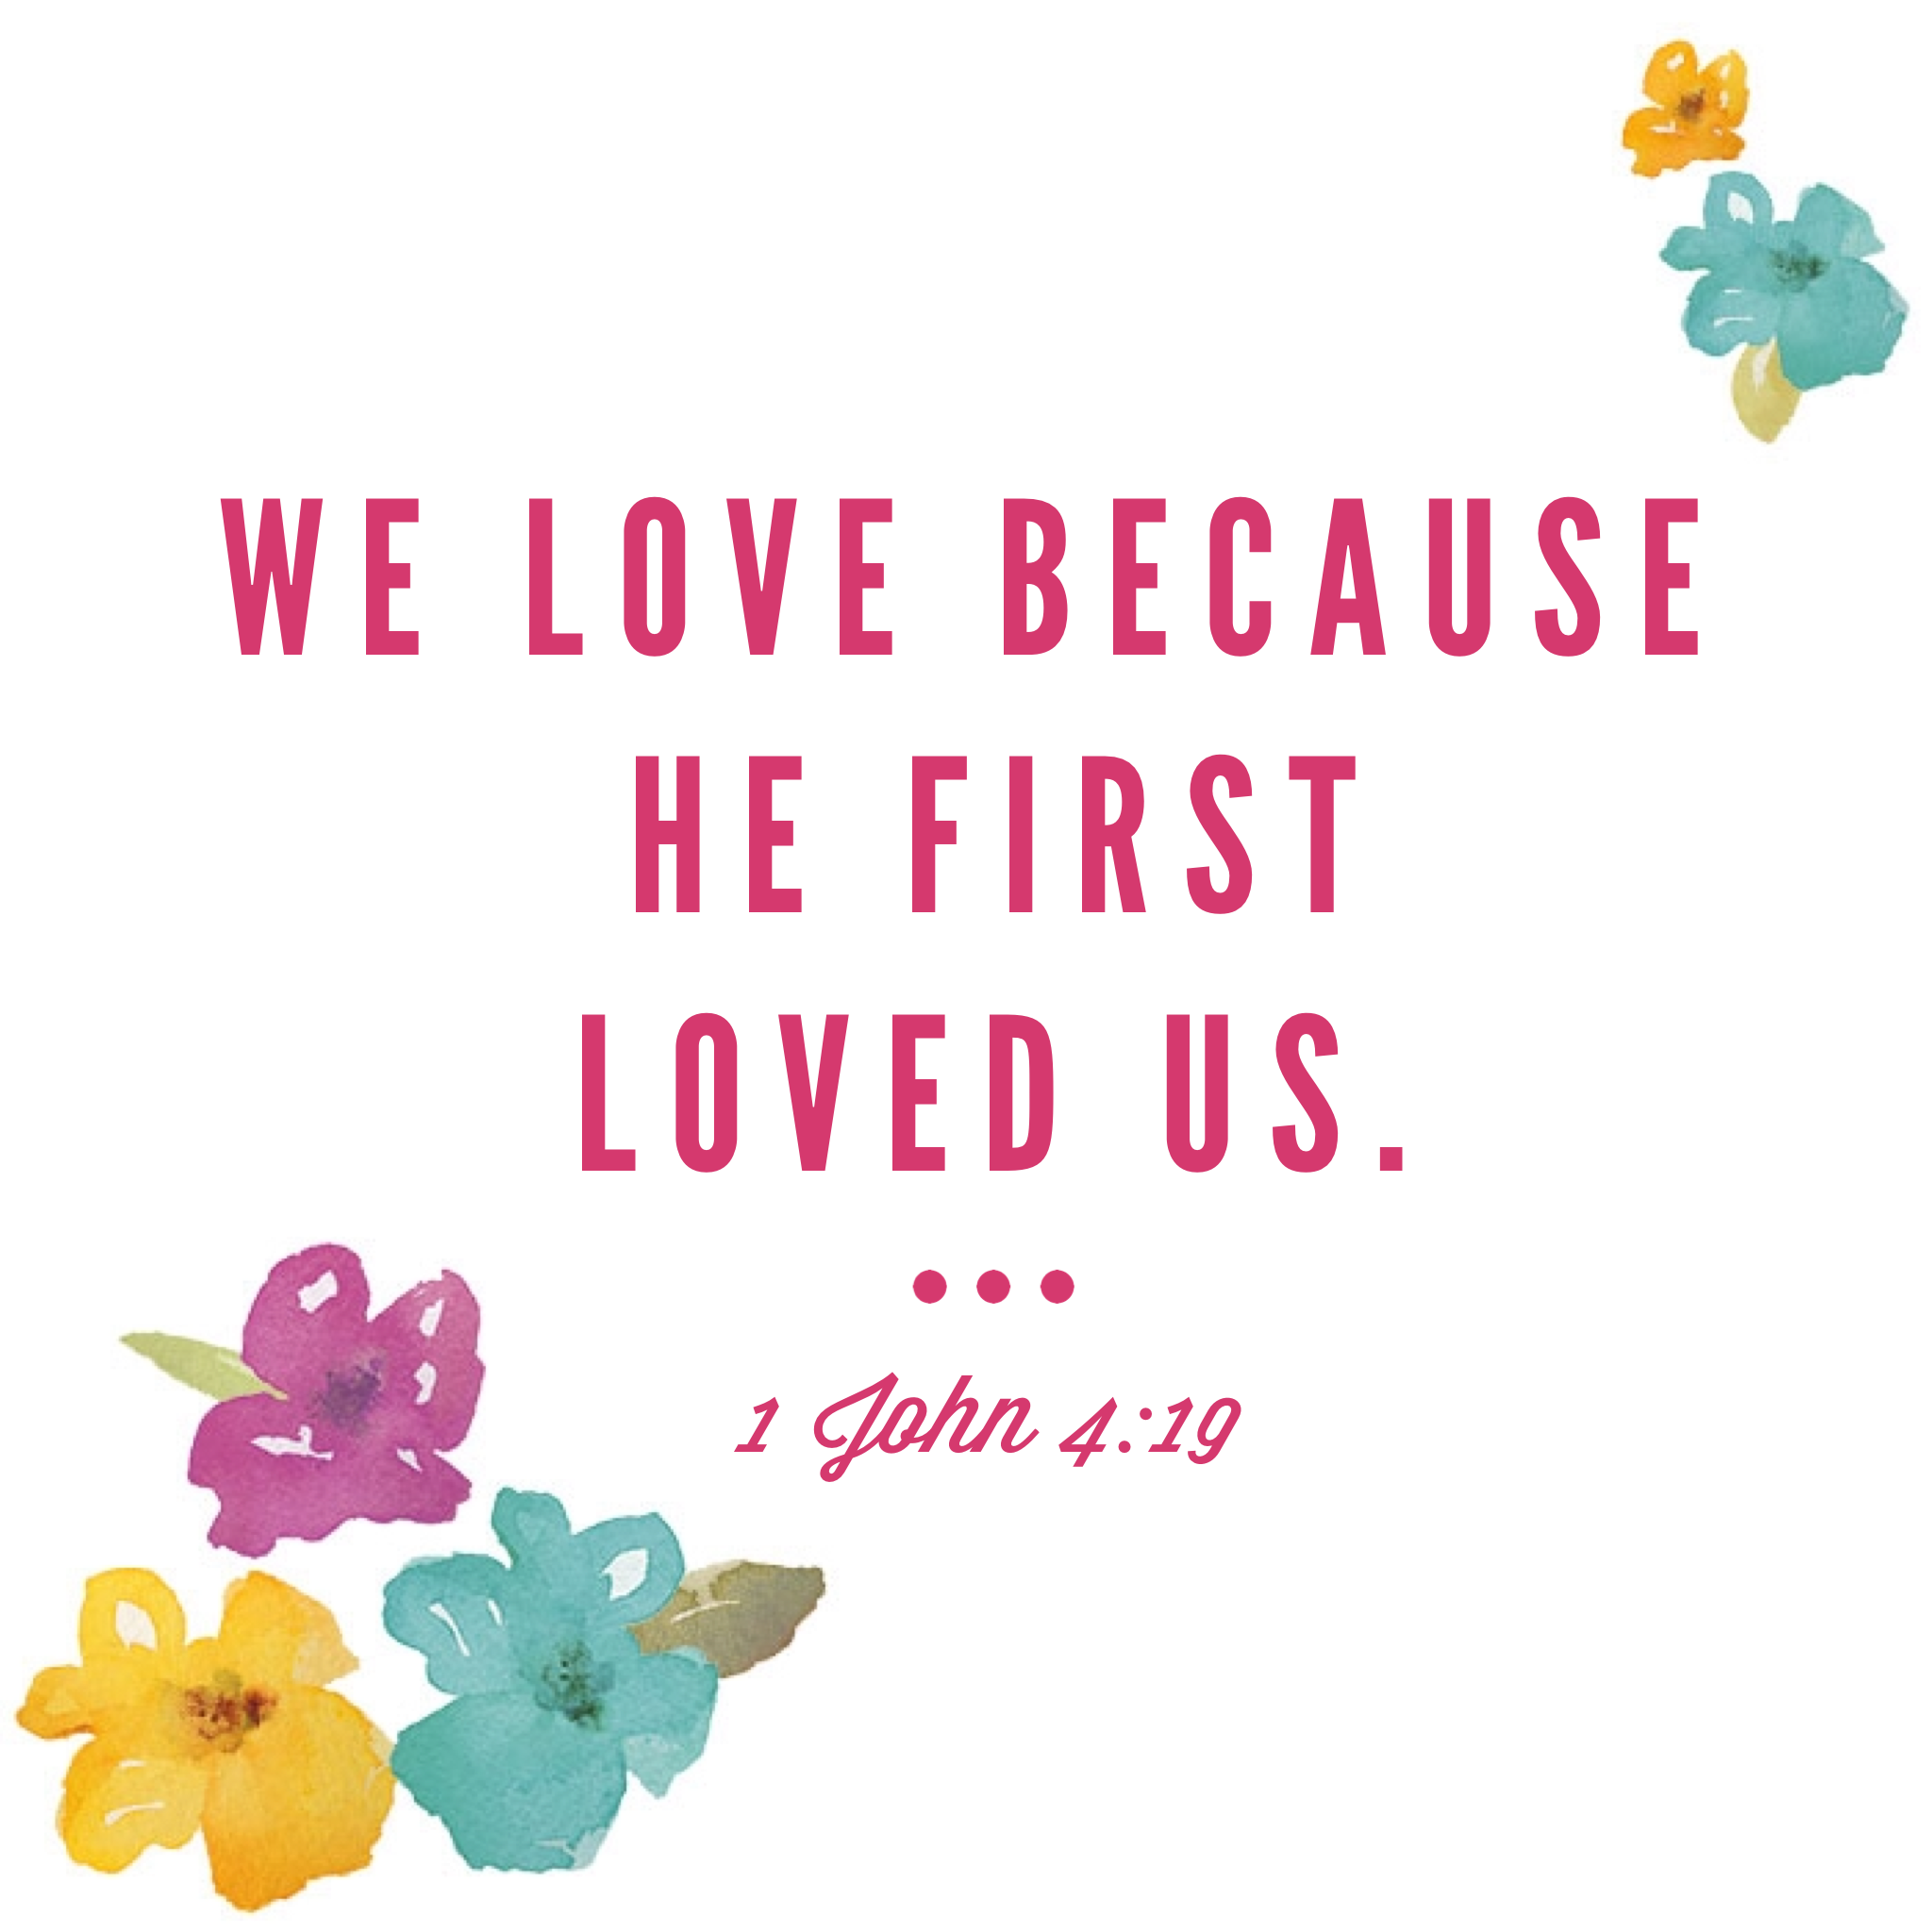 We love because he first loved us. - 1 John 4,19